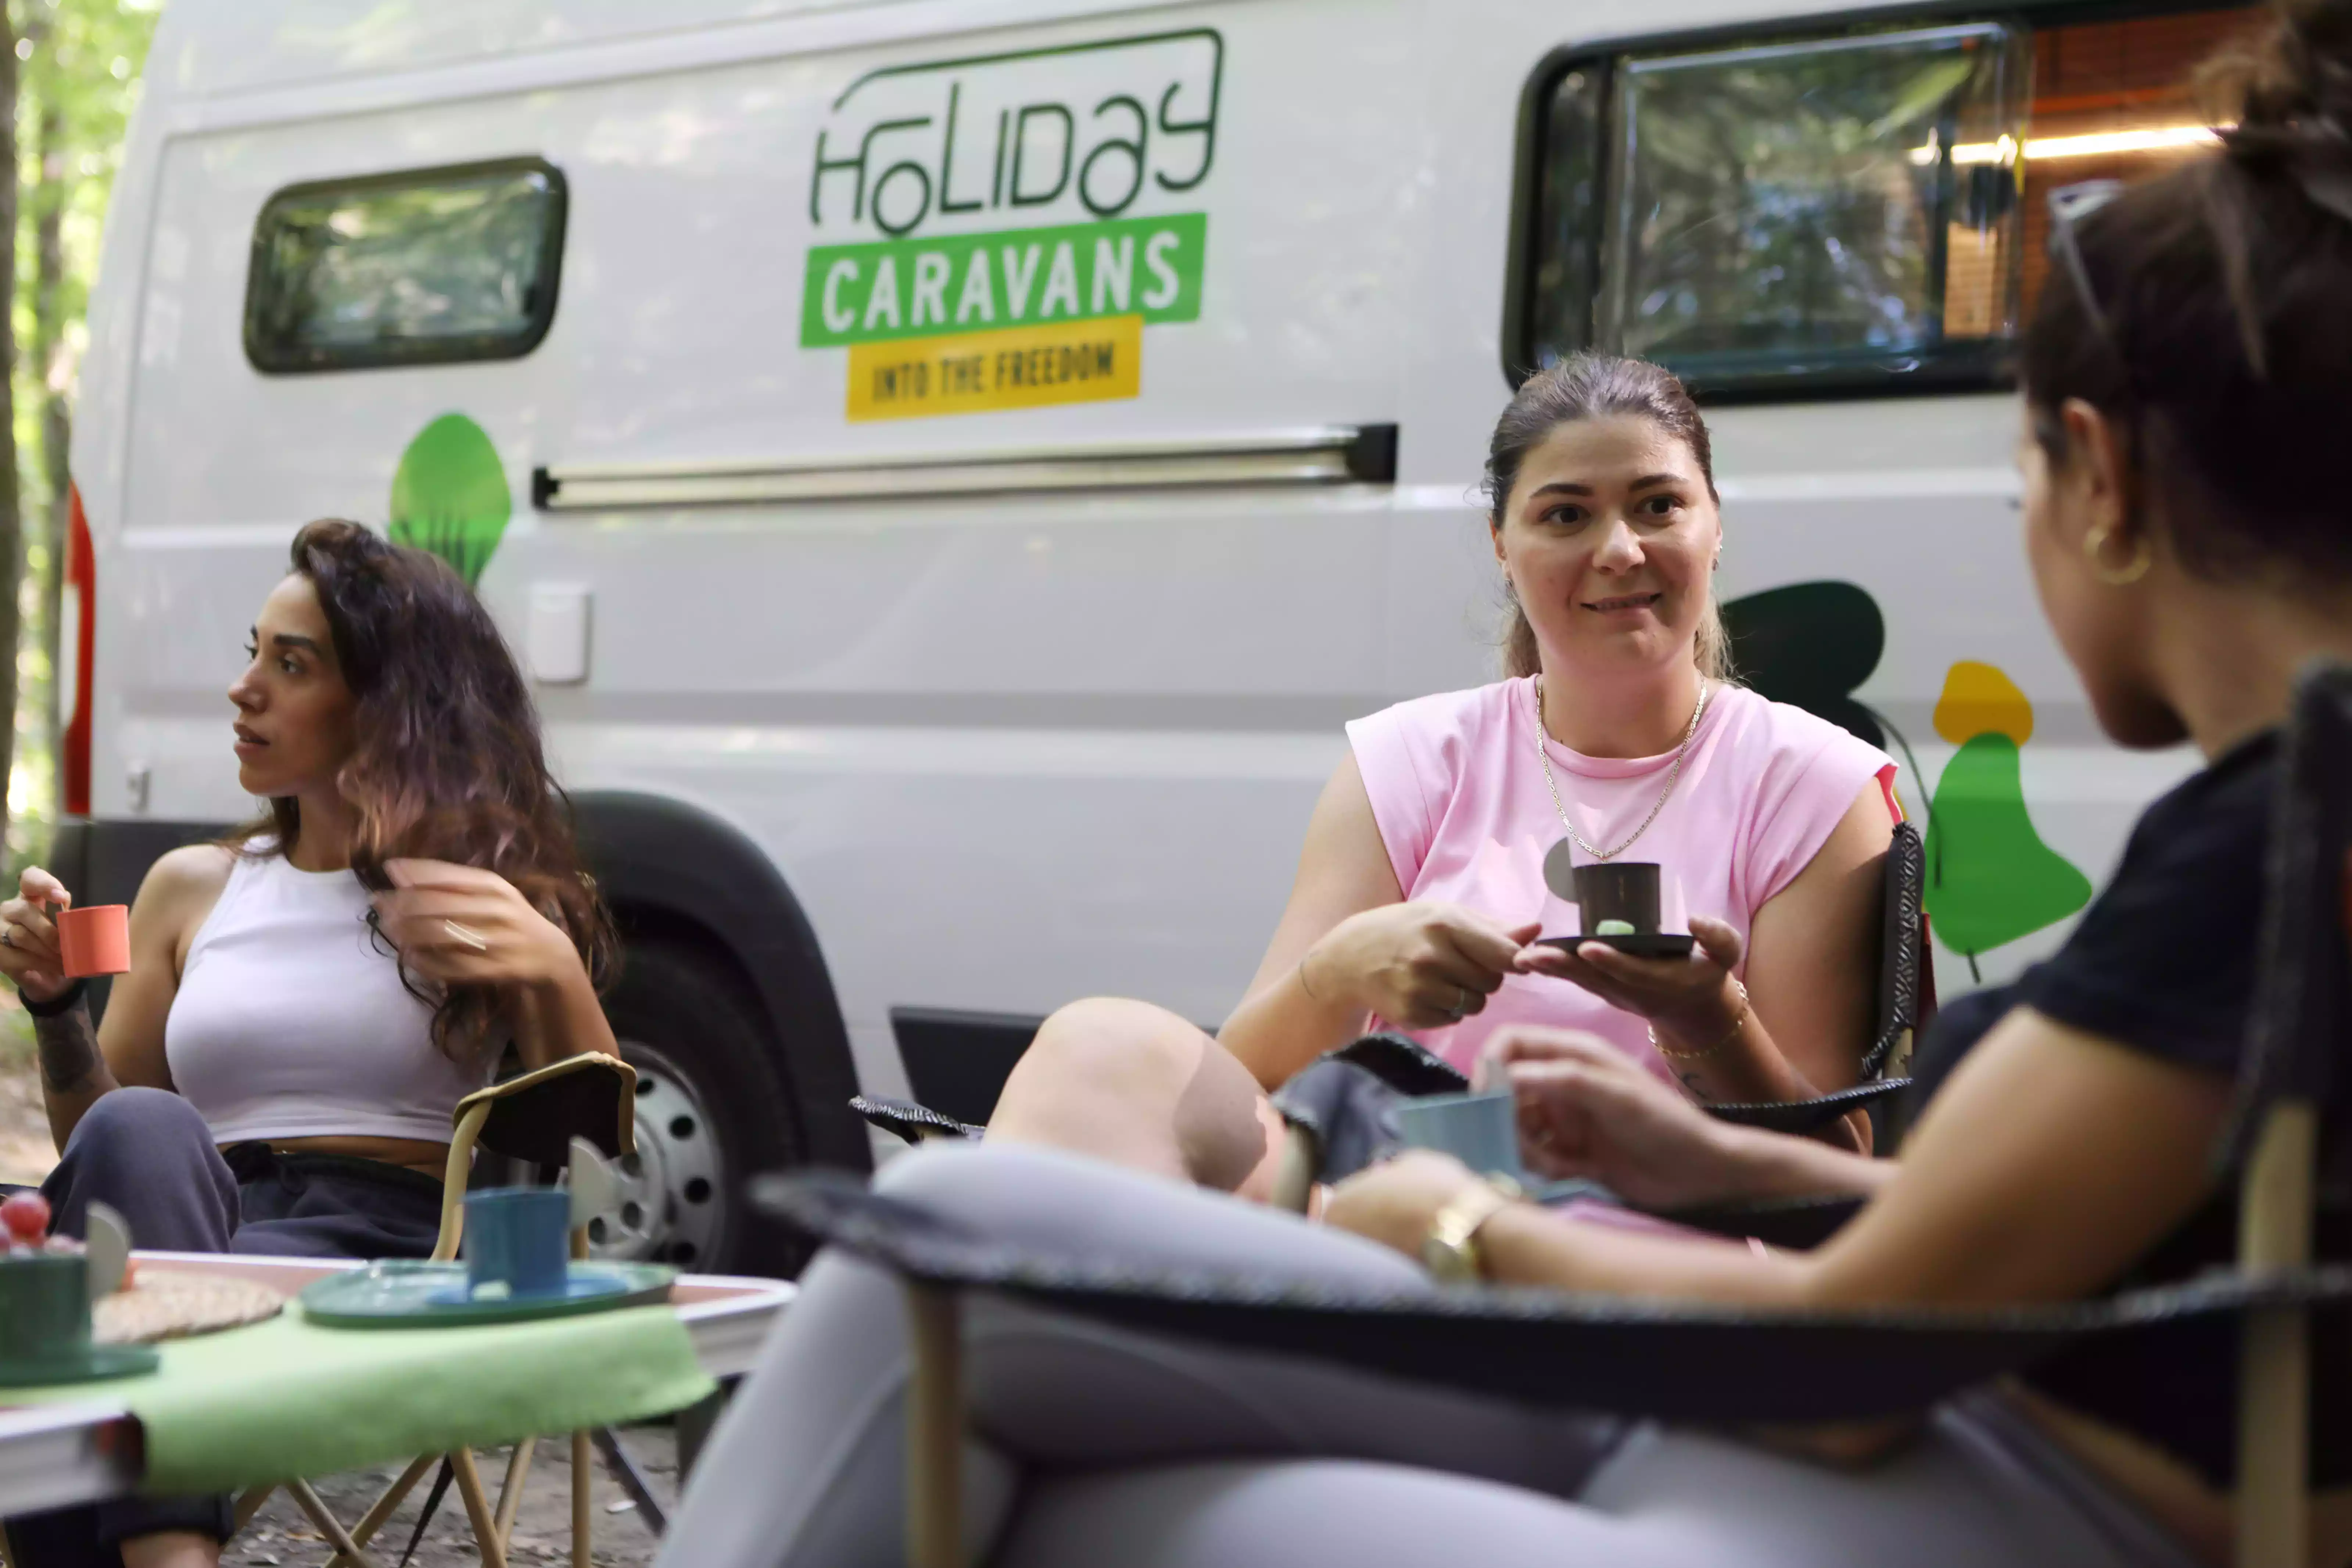 Life-saving advice for those who will experience a caravan for the first time or go on holiday;